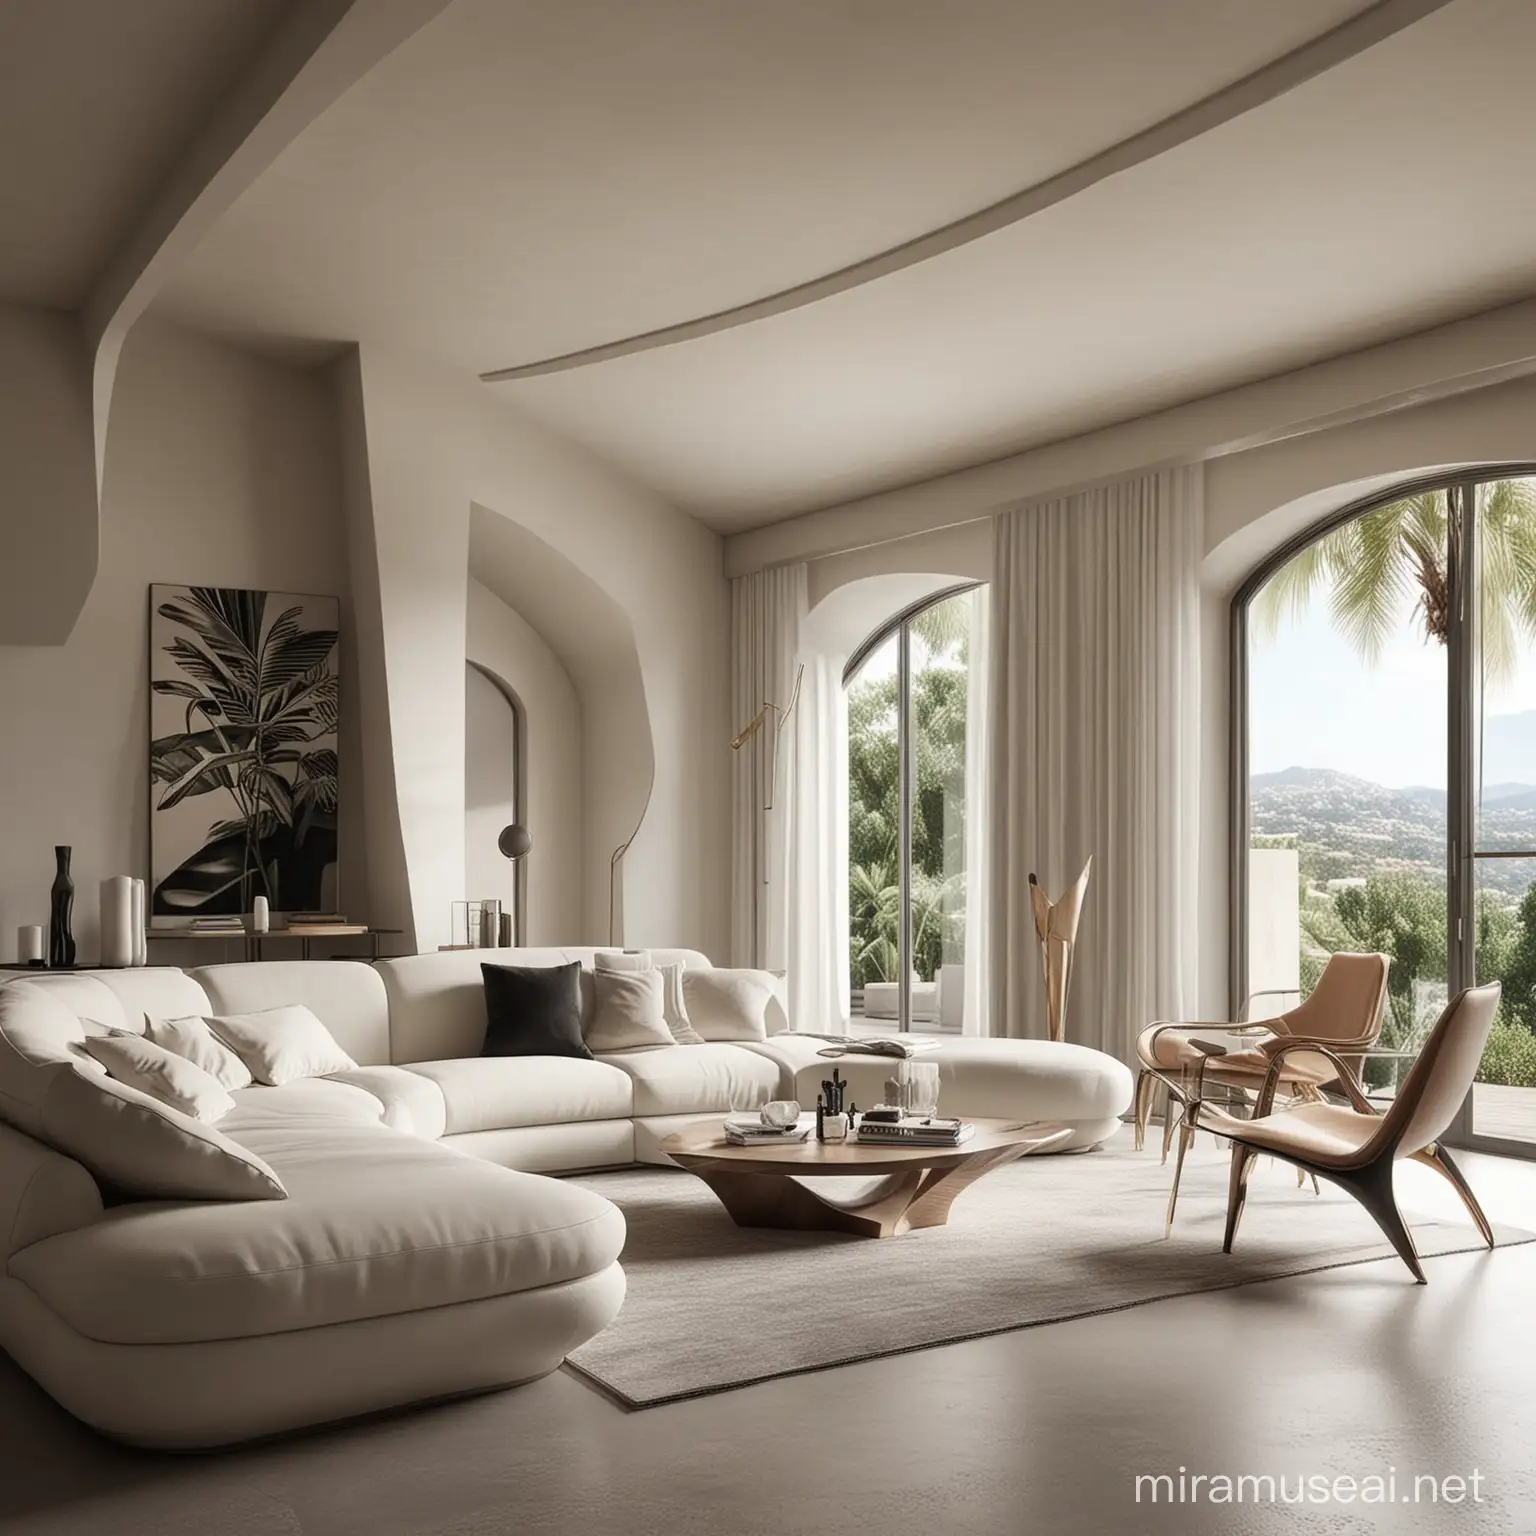 a tropical Sicily living room#influenced by the works of Zaha Hadid#Newcollection#newstyl#tredy#livingroom#interiordesign#aiprompts#archdaily#aiinteriordesign#decoration#interiordesignerslife#interiordesignersofinstagram#interiordesignblogger#interiordesignlover#digitalart#furniture#homedecor#productdesign#interiordesigninspiration#setdesign#visual#visualart#interiordesignaddict#midjourney